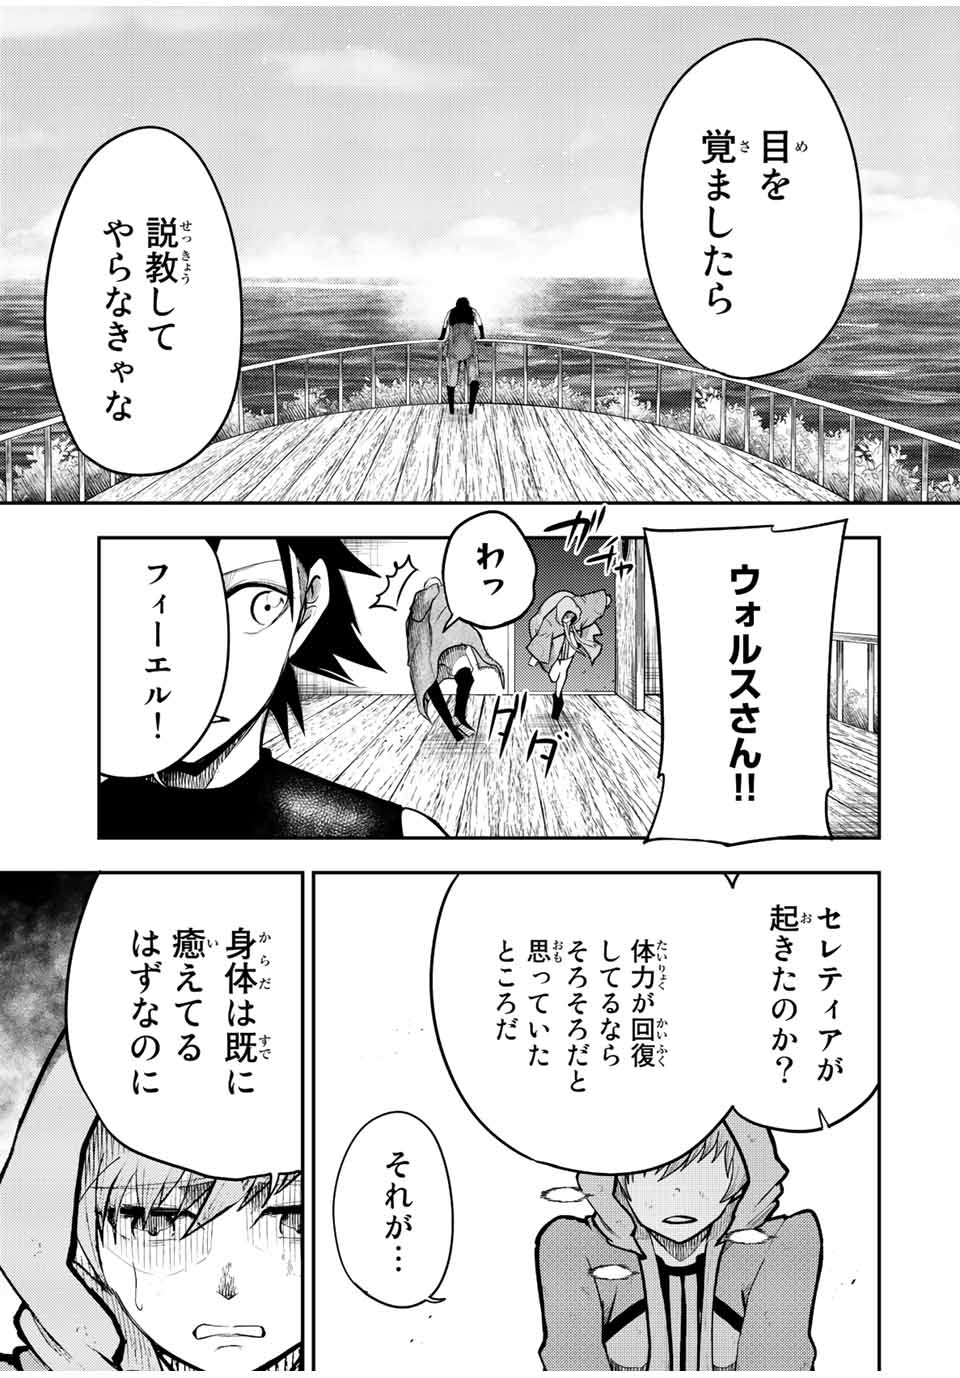 the strongest former prince-; 奴隷転生 ～その奴隷、最強の元王子につき～ 第65話 - Page 19